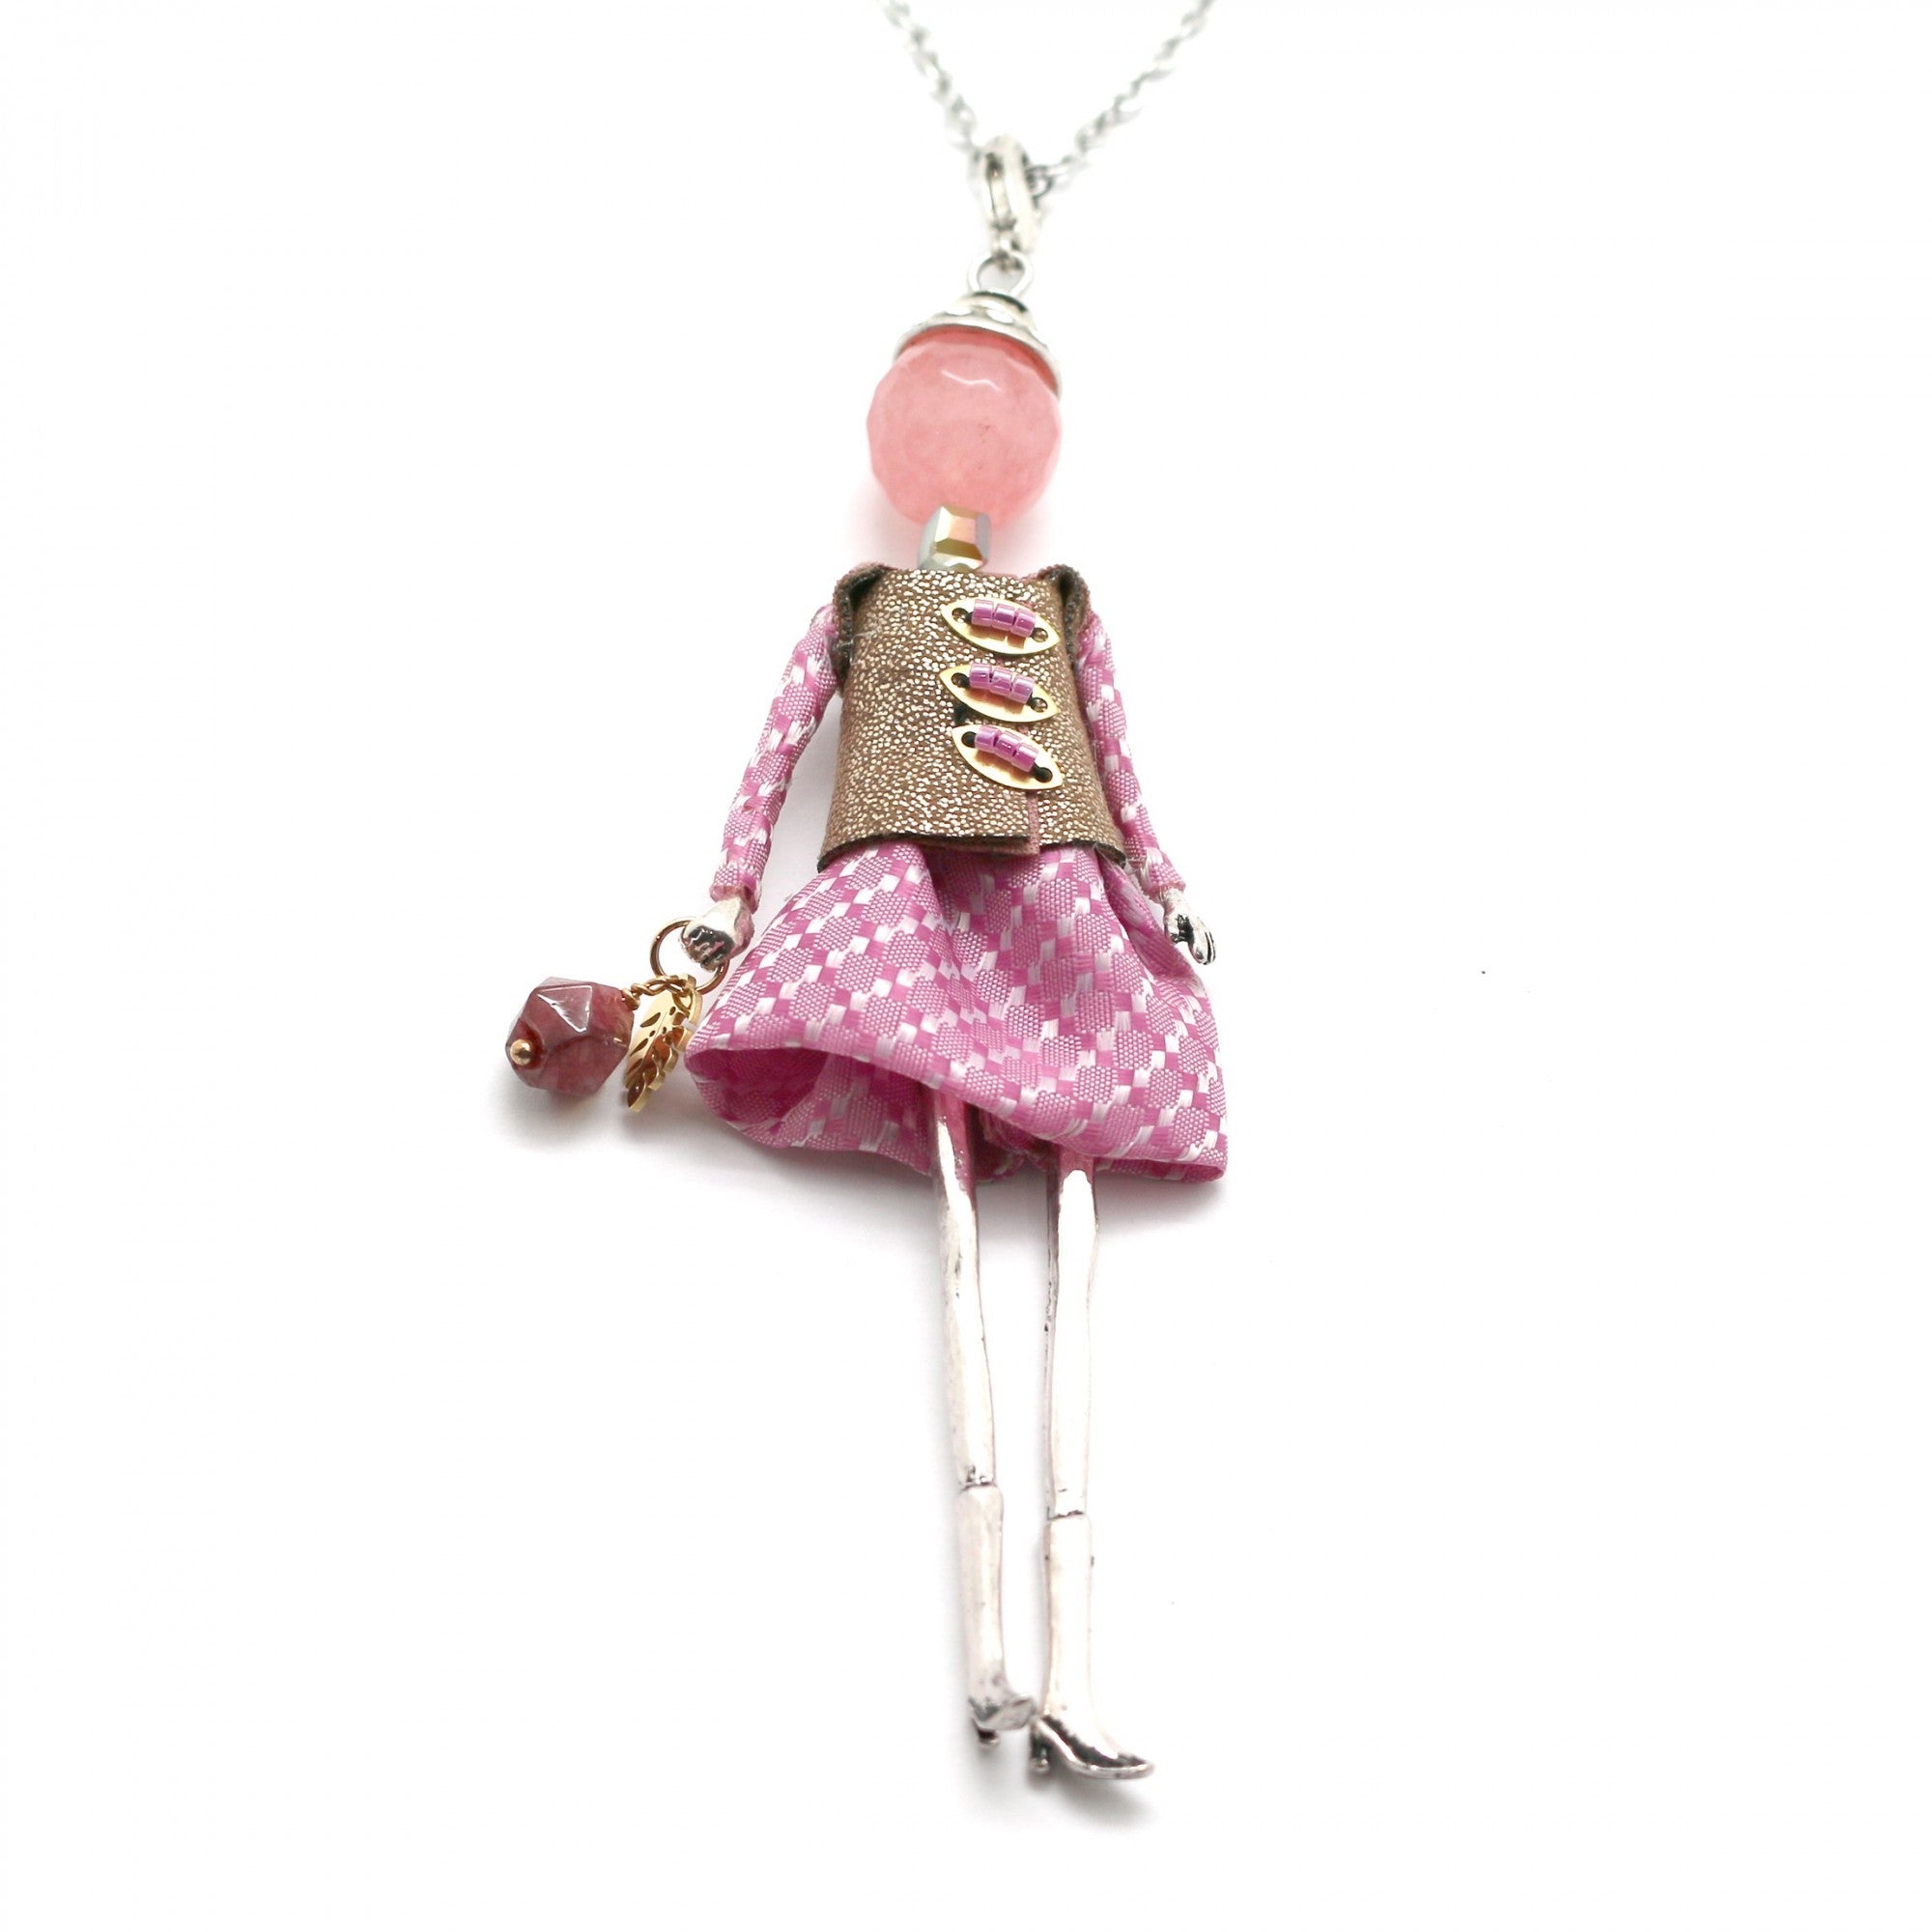 Moon C Doll Pendant on a Long Chain, Agate, Fabric, Metal / Pink / 4 Inches /Girl Gift